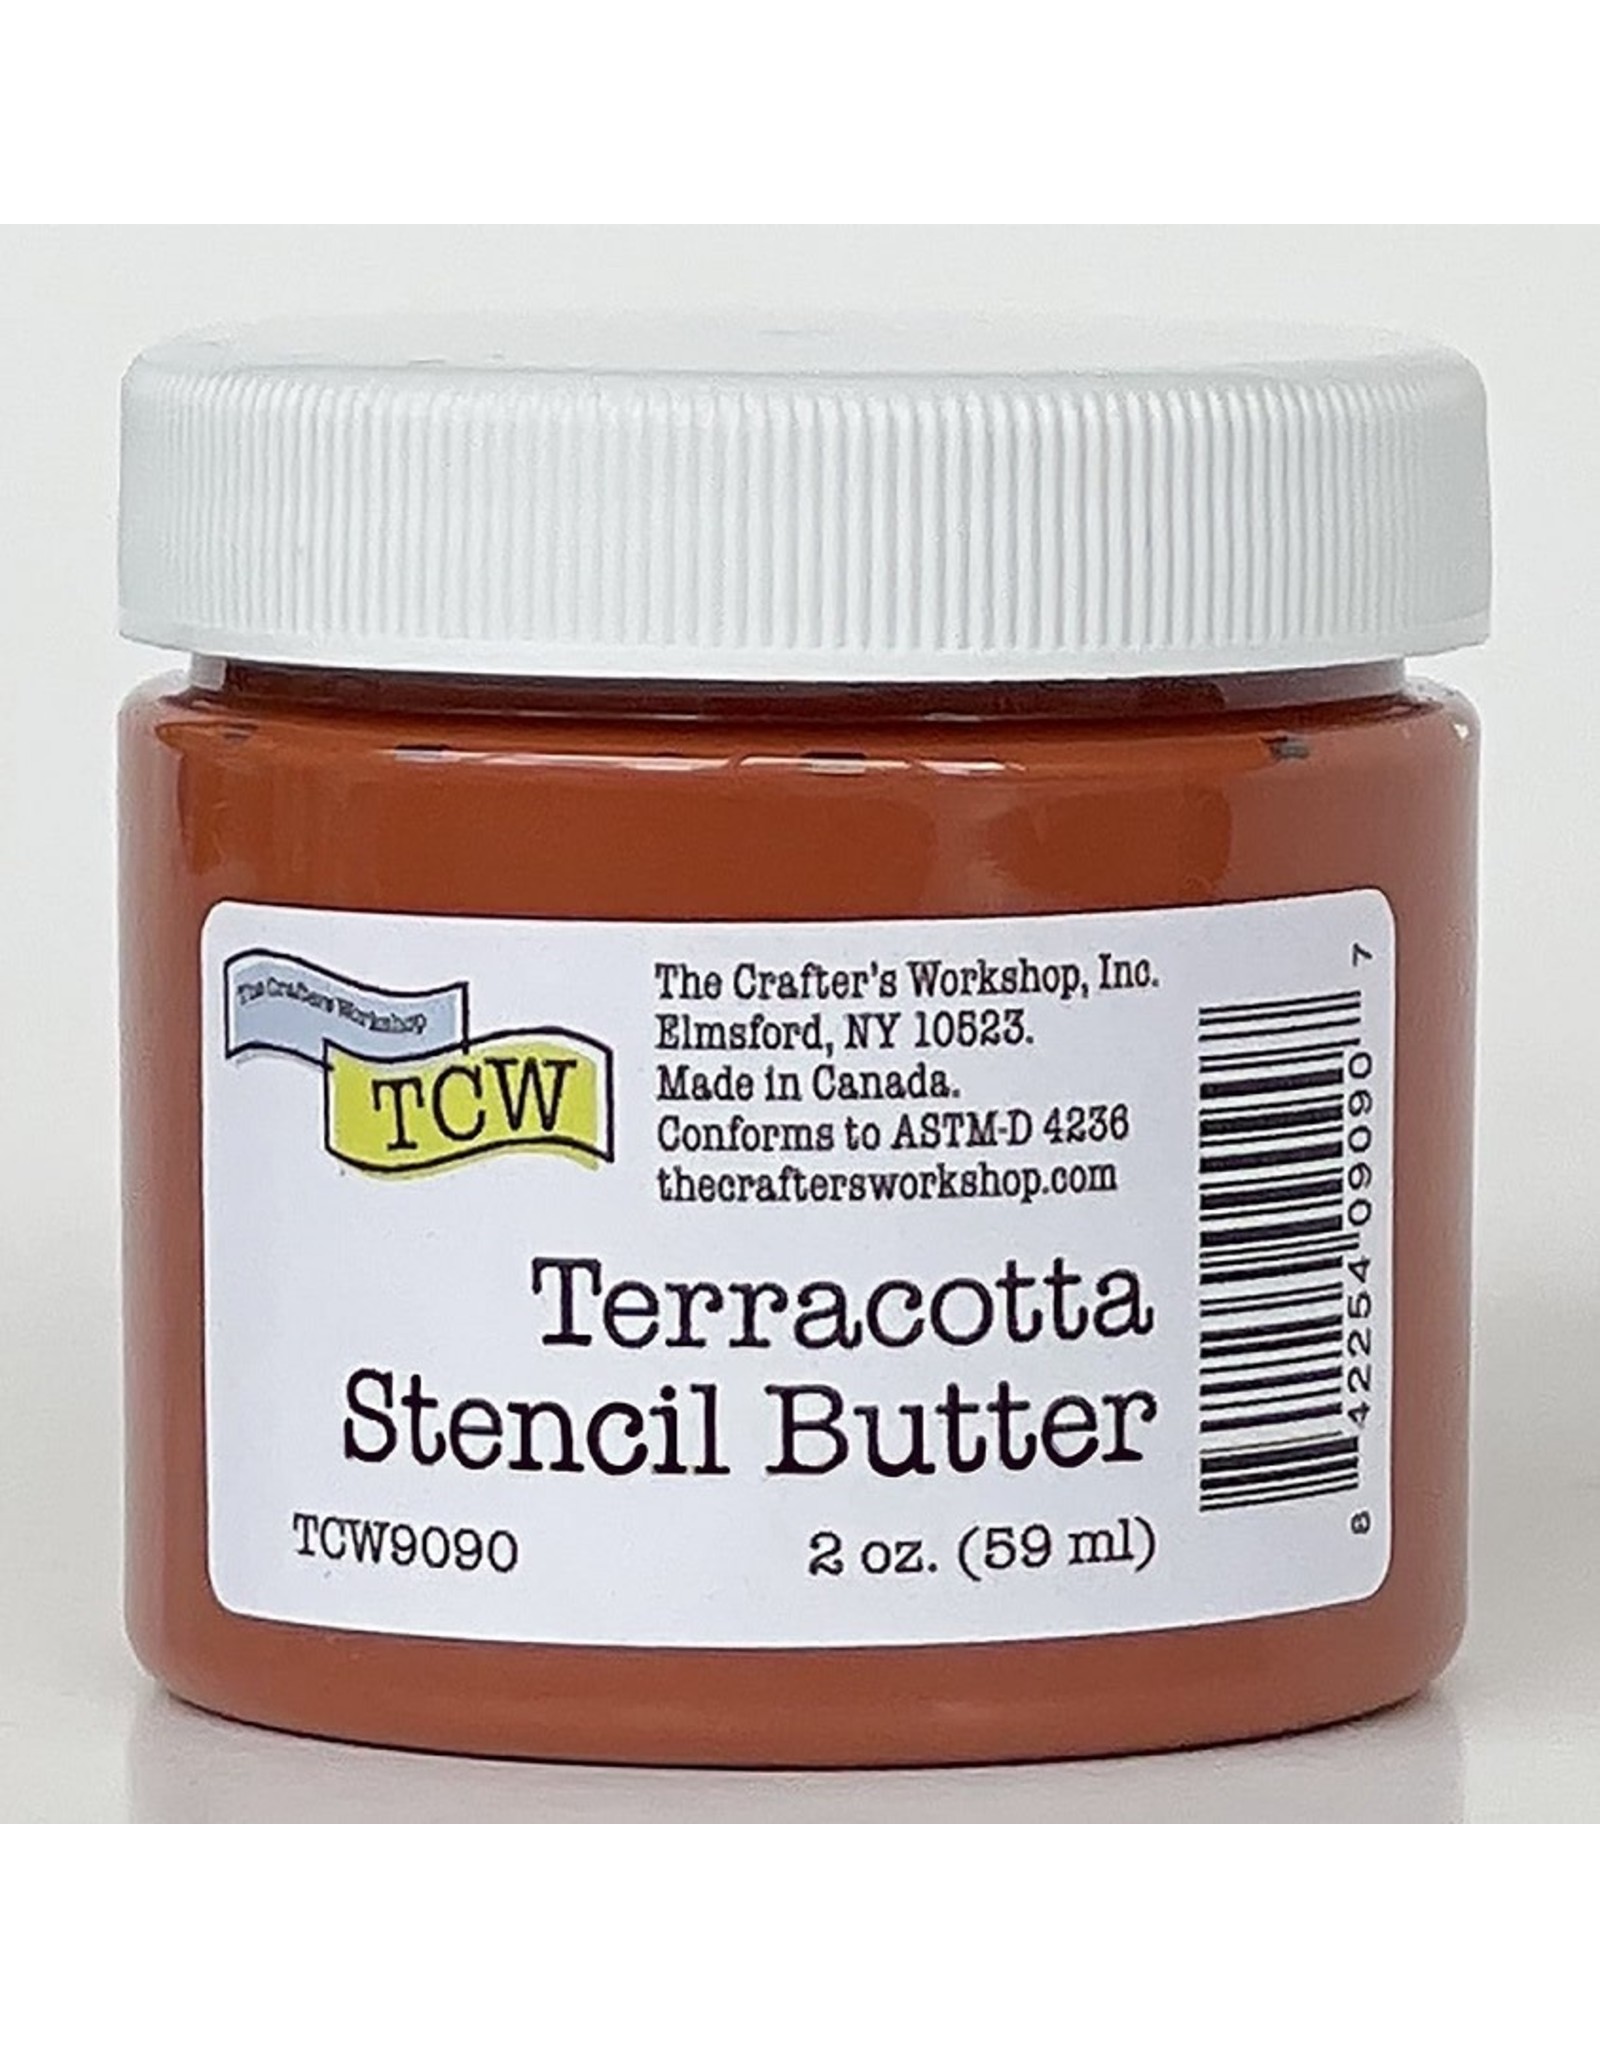 THE CRAFTERS WORKSHOP Stencil Butter 2 oz. - Terracotta